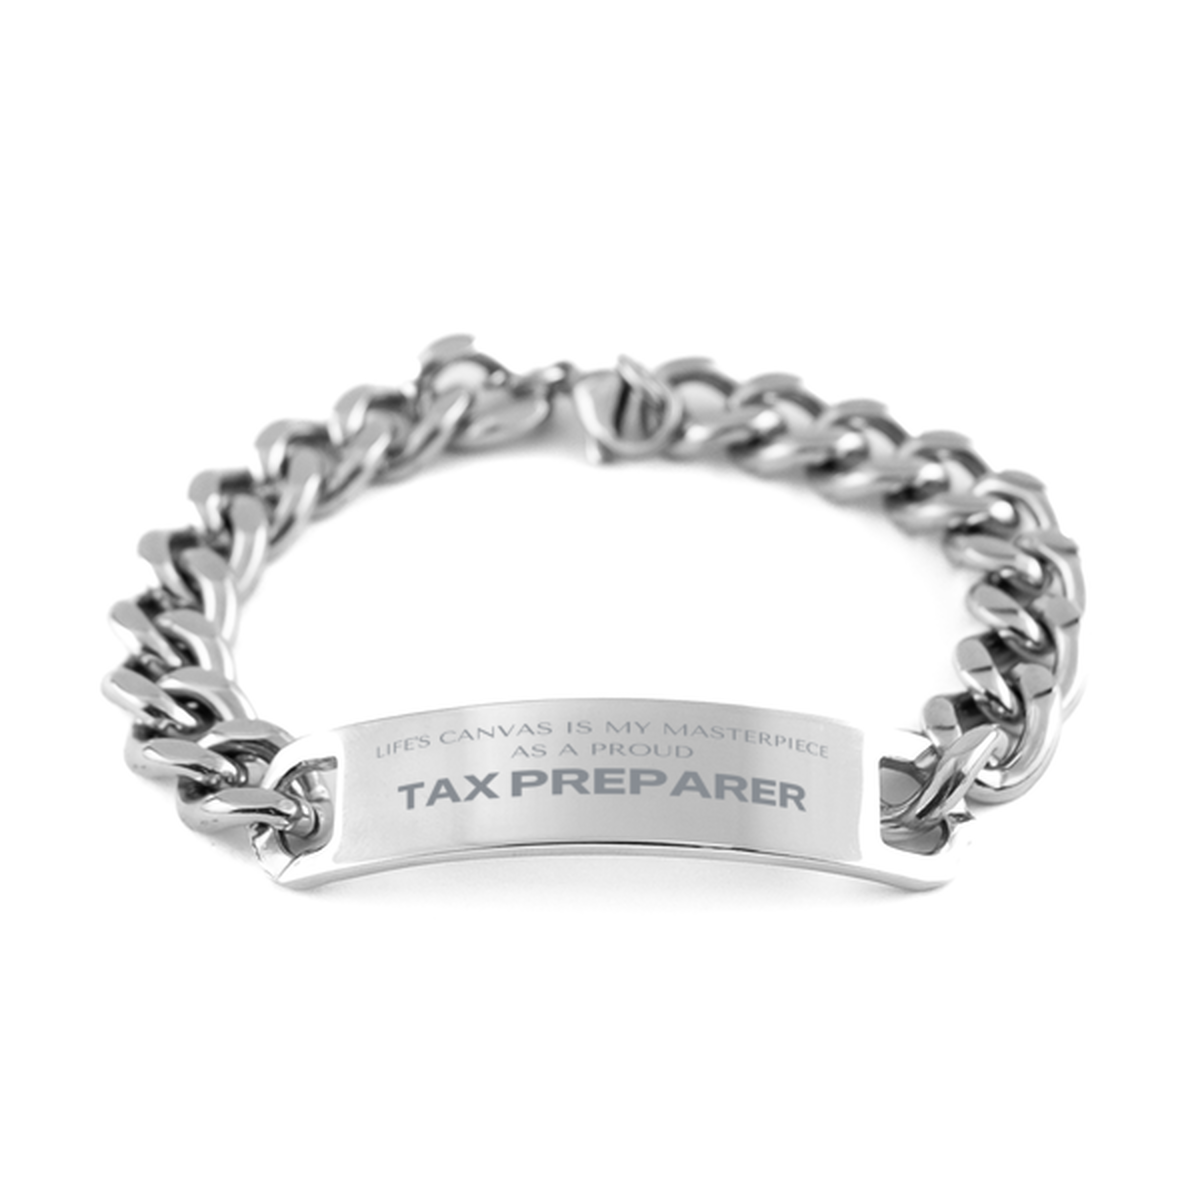 Proud Tax Preparer Gifts, Life's canvas is my masterpiece, Epic Birthday Christmas Unique Cuban Chain Stainless Steel Bracelet For Tax Preparer, Coworkers, Men, Women, Friends